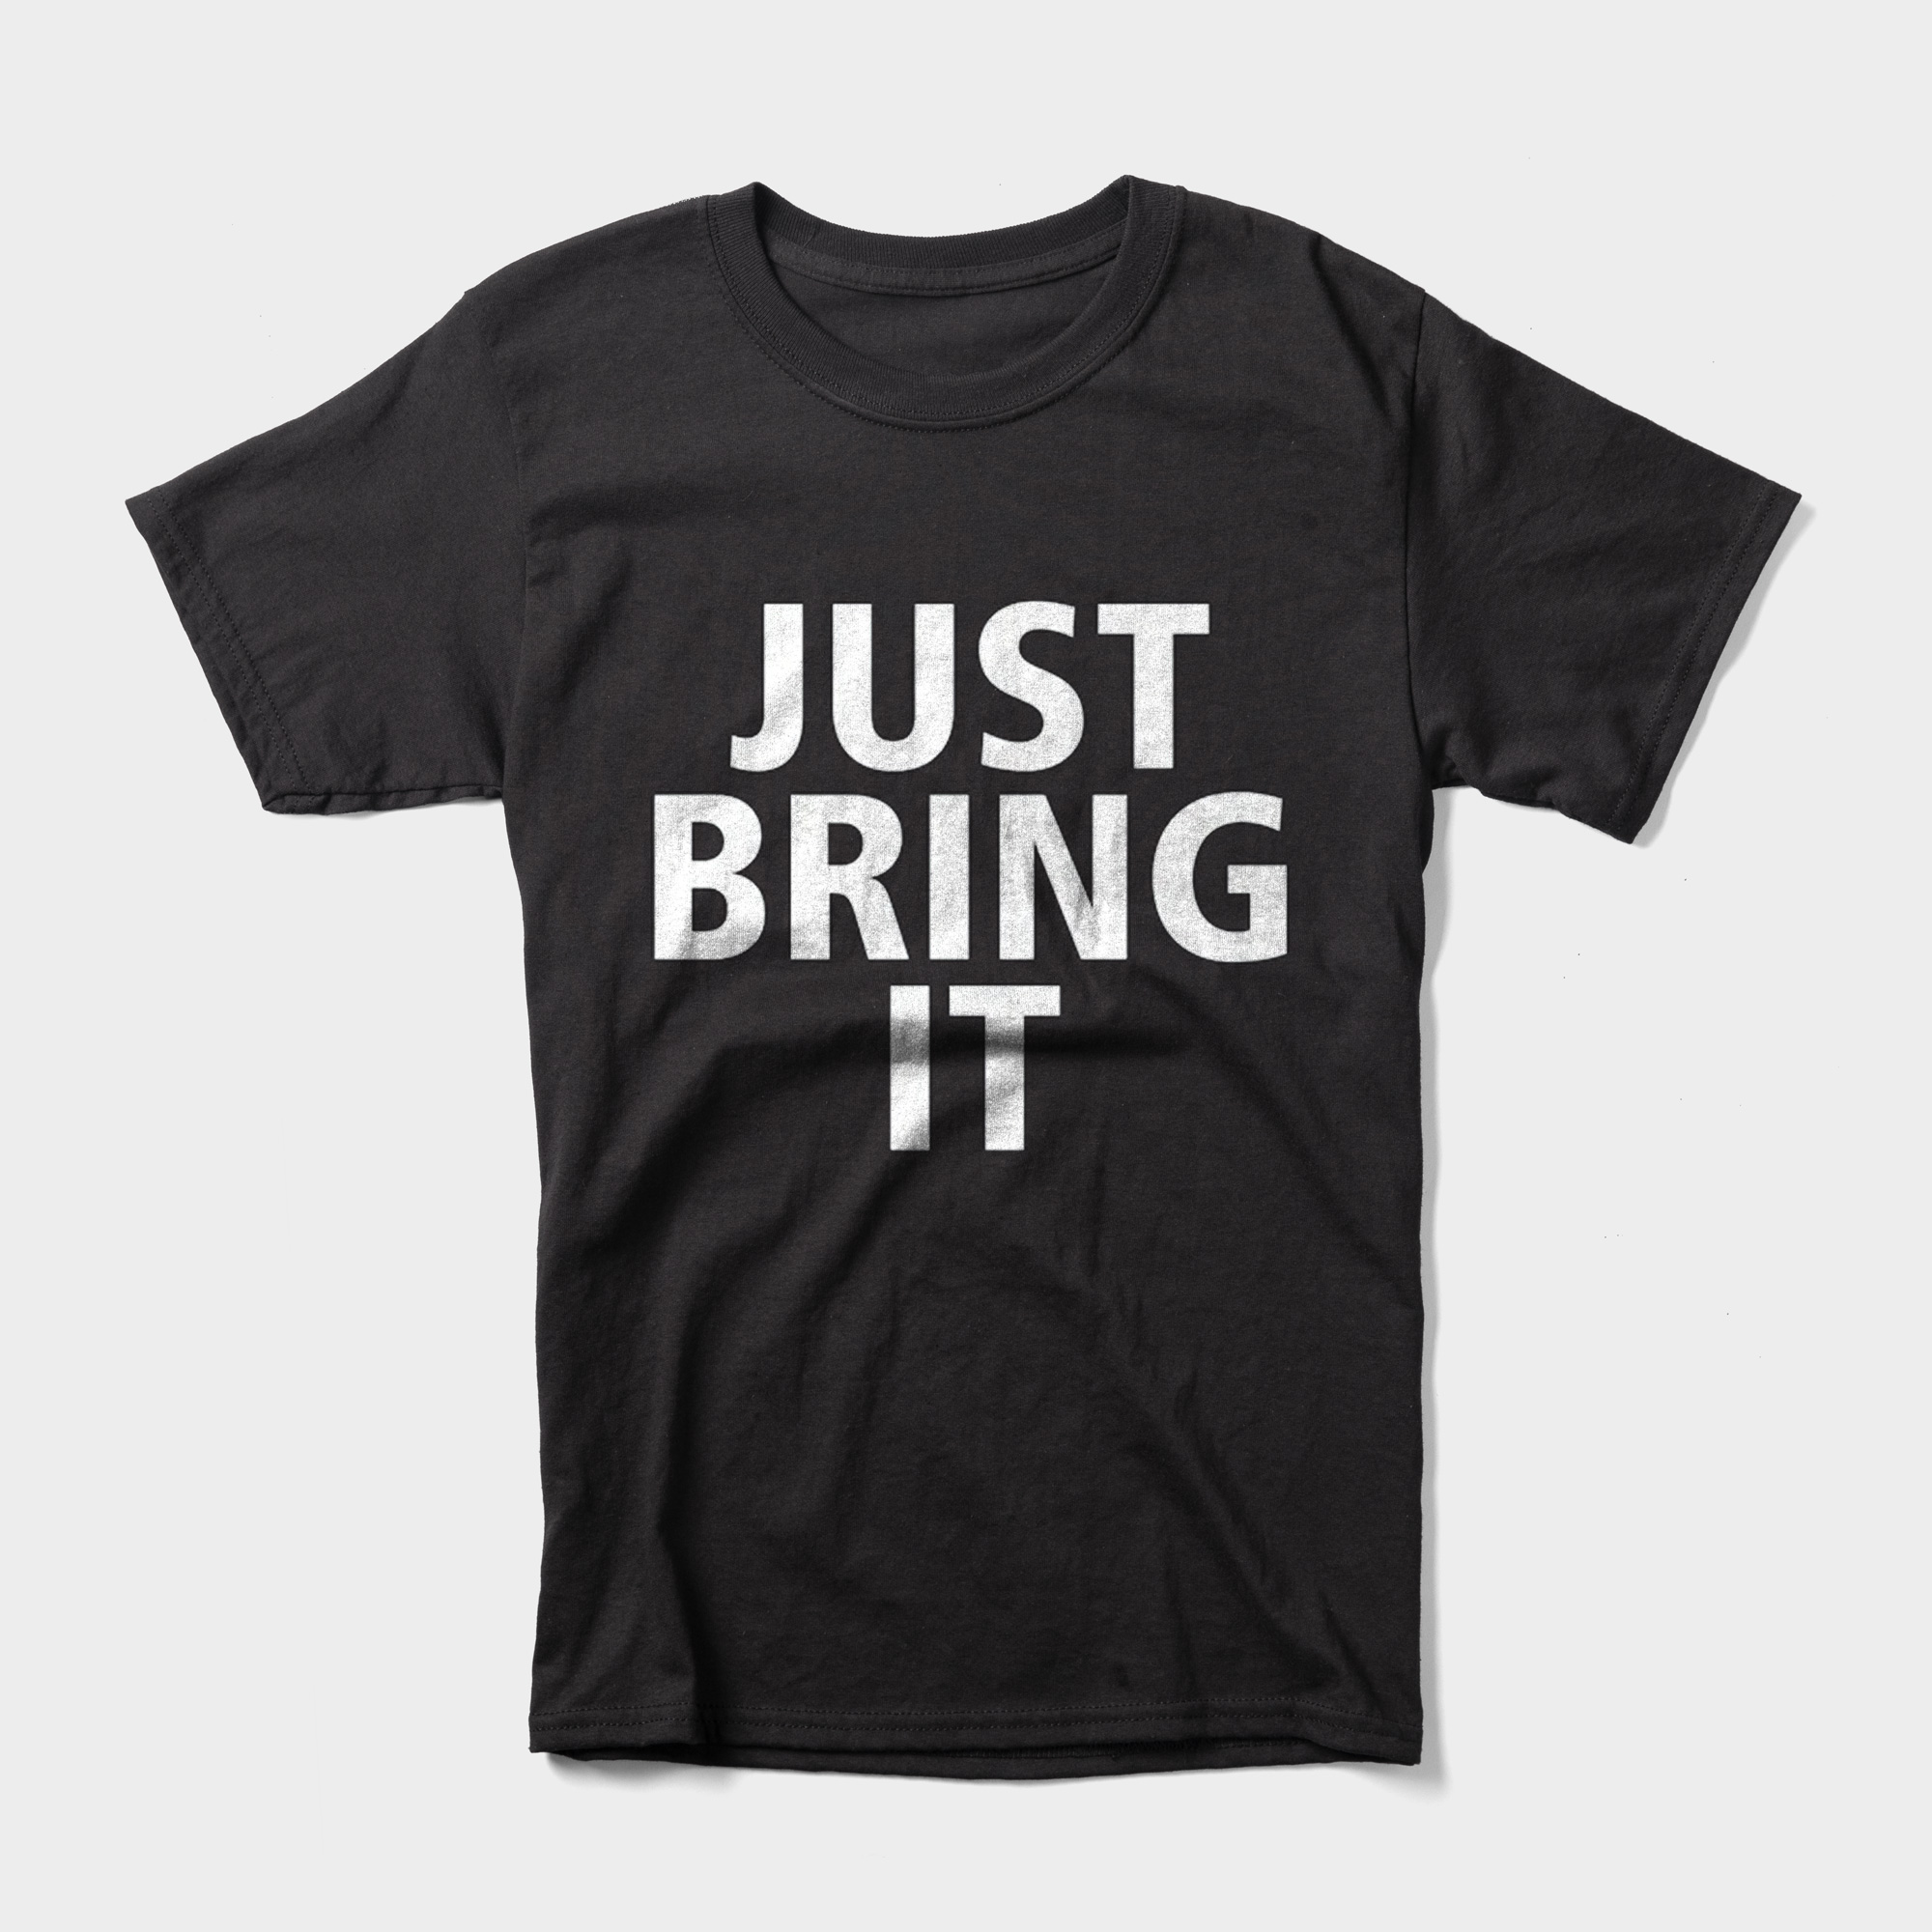 The Rock's "Just Bring It" t-shirt commemorates his legacy. 